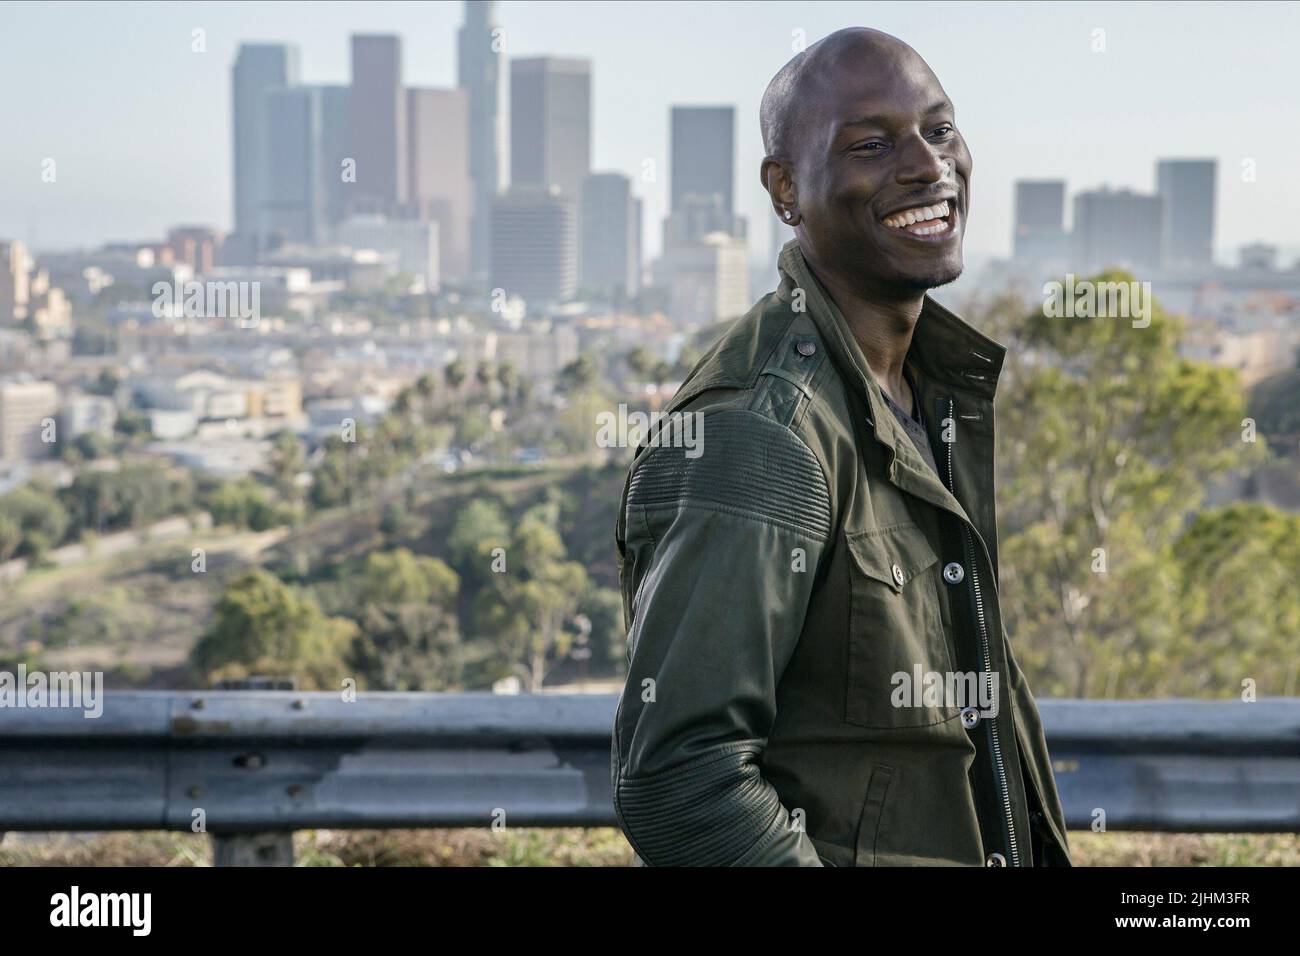 Tyrese Gibson, Fast and Furious 7, 2015 Banque D'Images